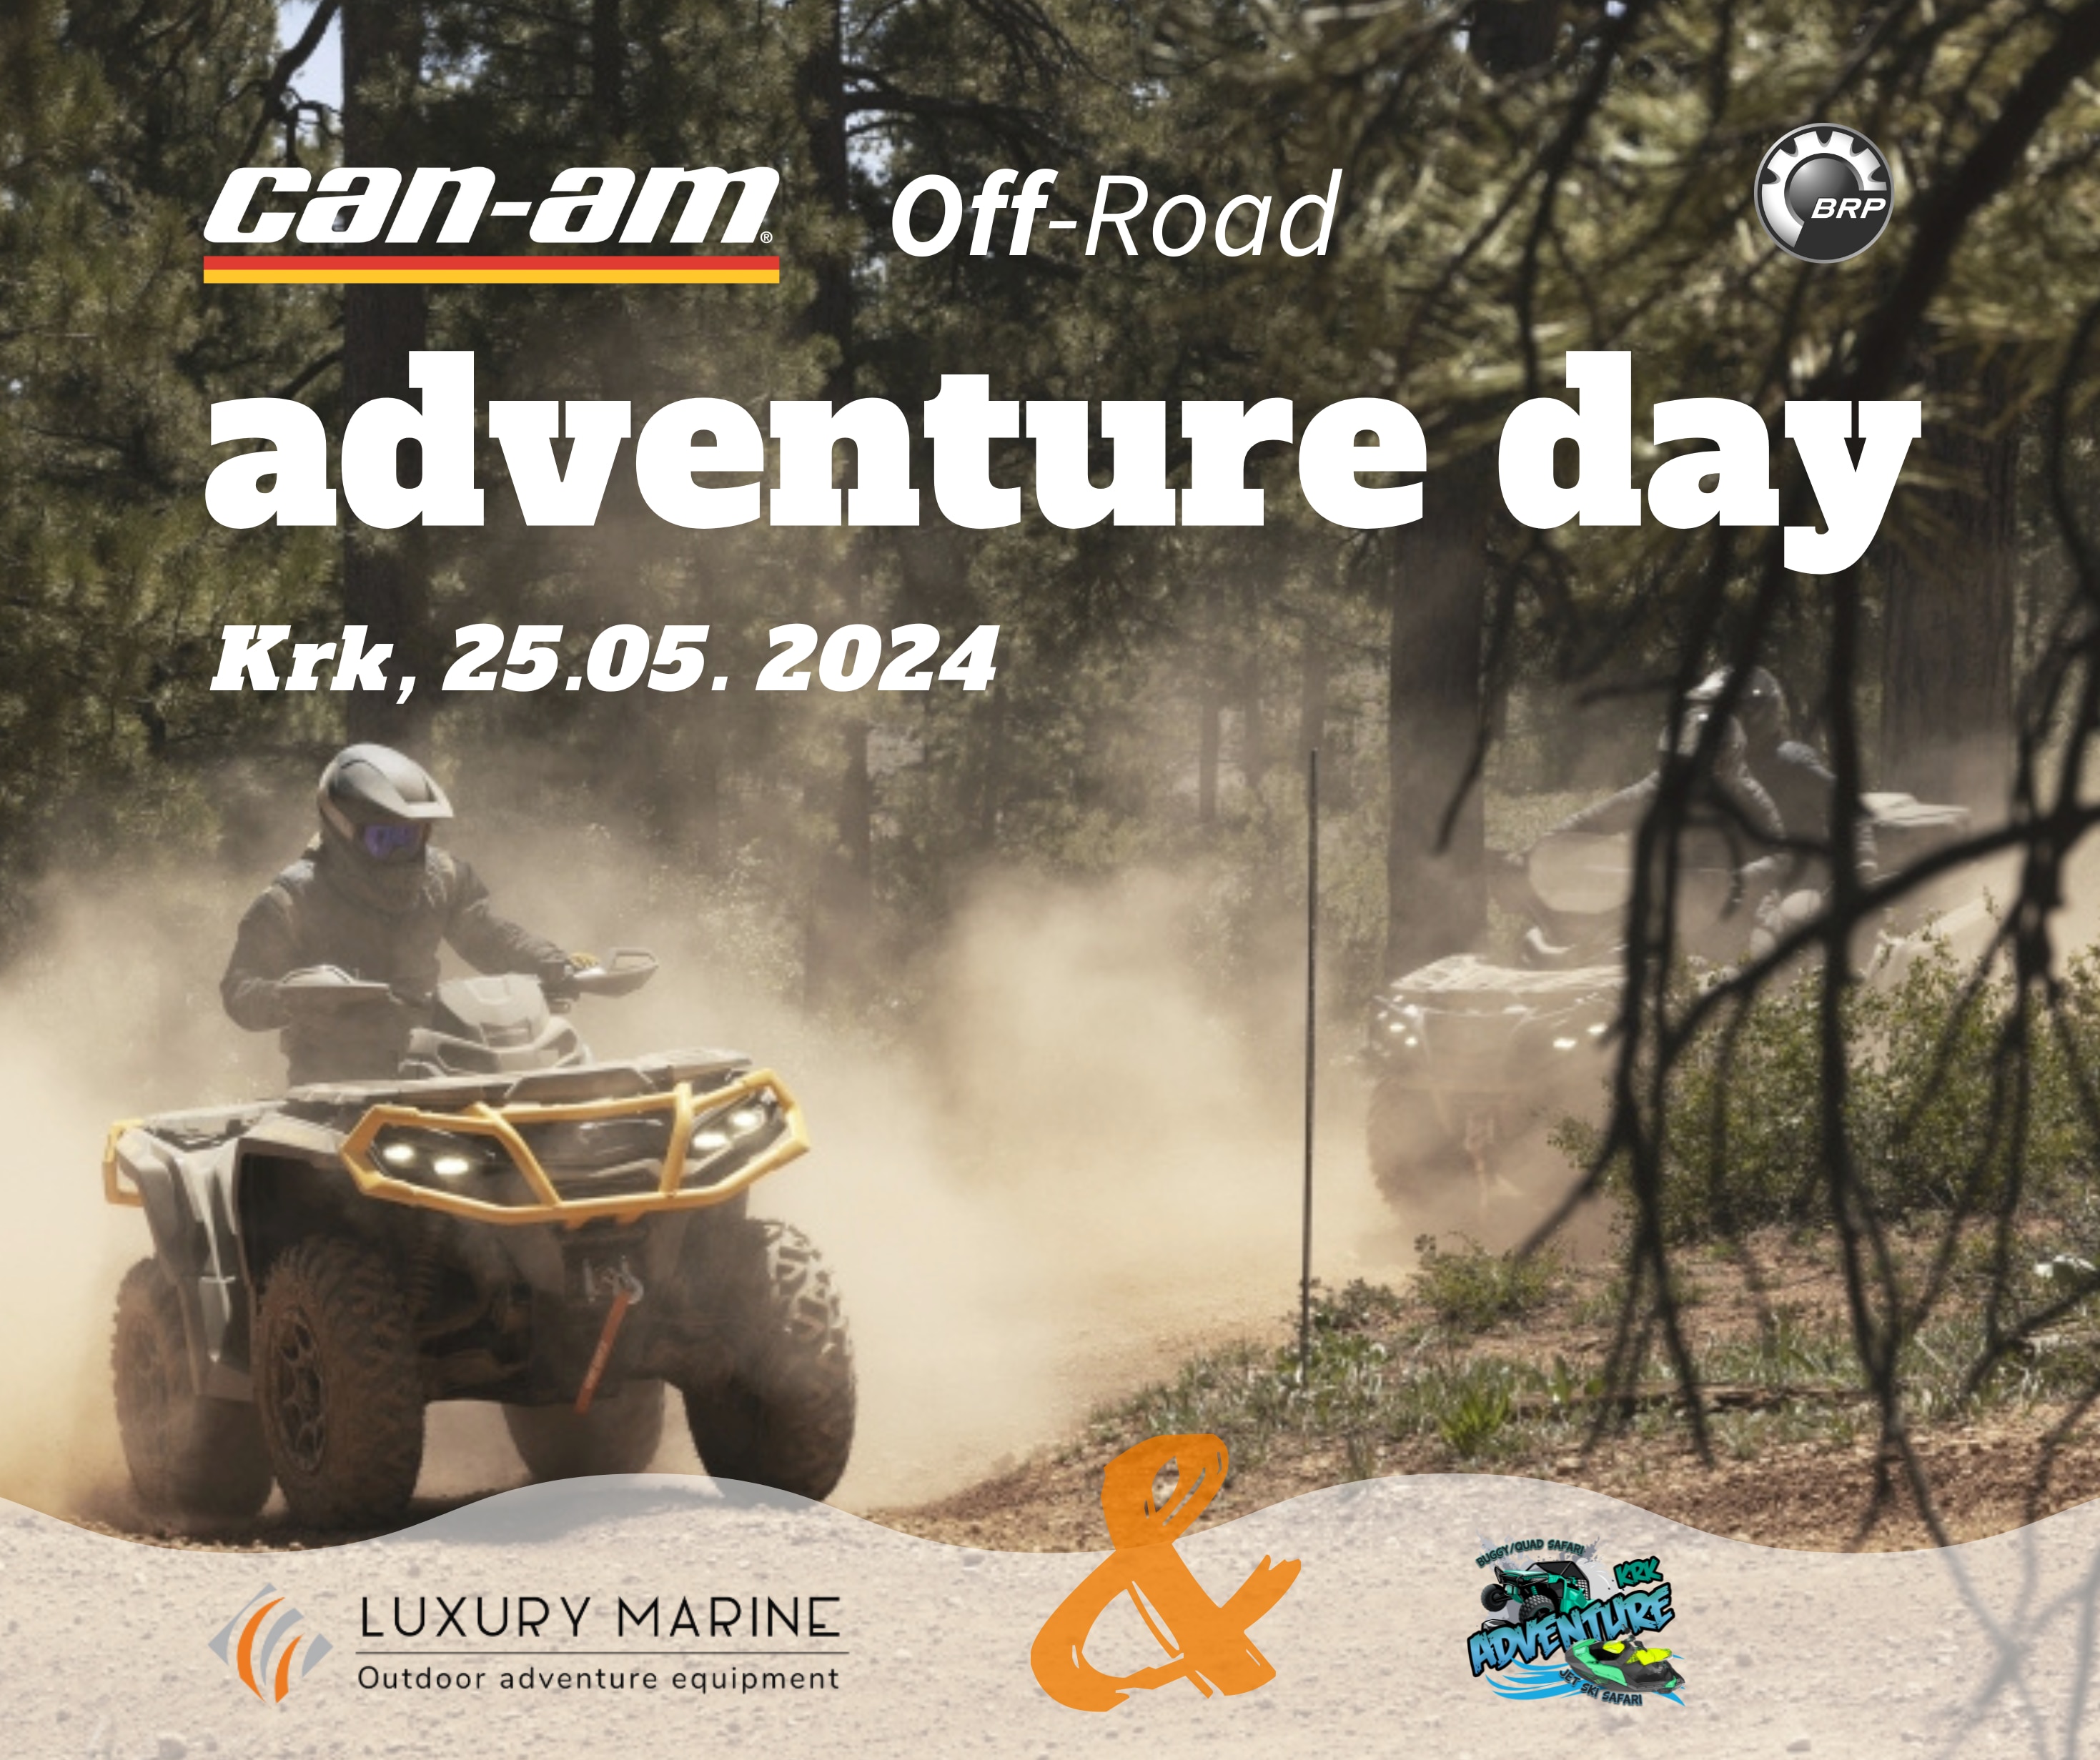 CAN AM OFF ROAD ADVENTURE DAY LUXURY MARINE